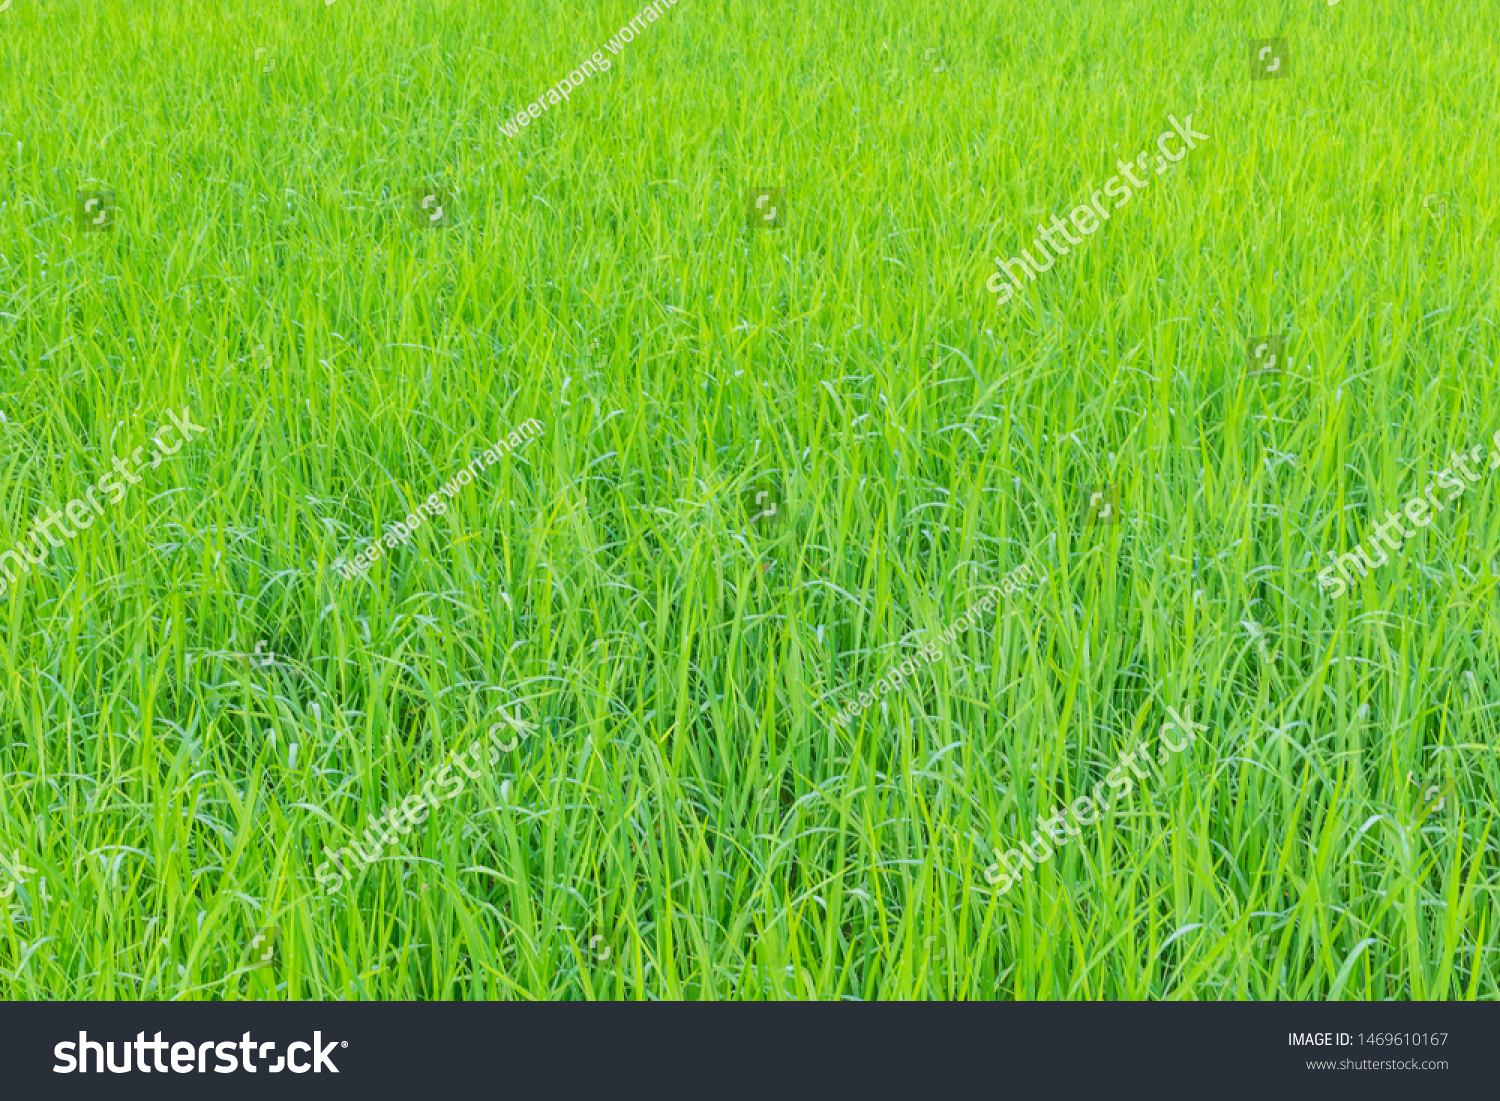 The soft focus surface texture of green paddy field, paddy leaf pattern. #1469610167